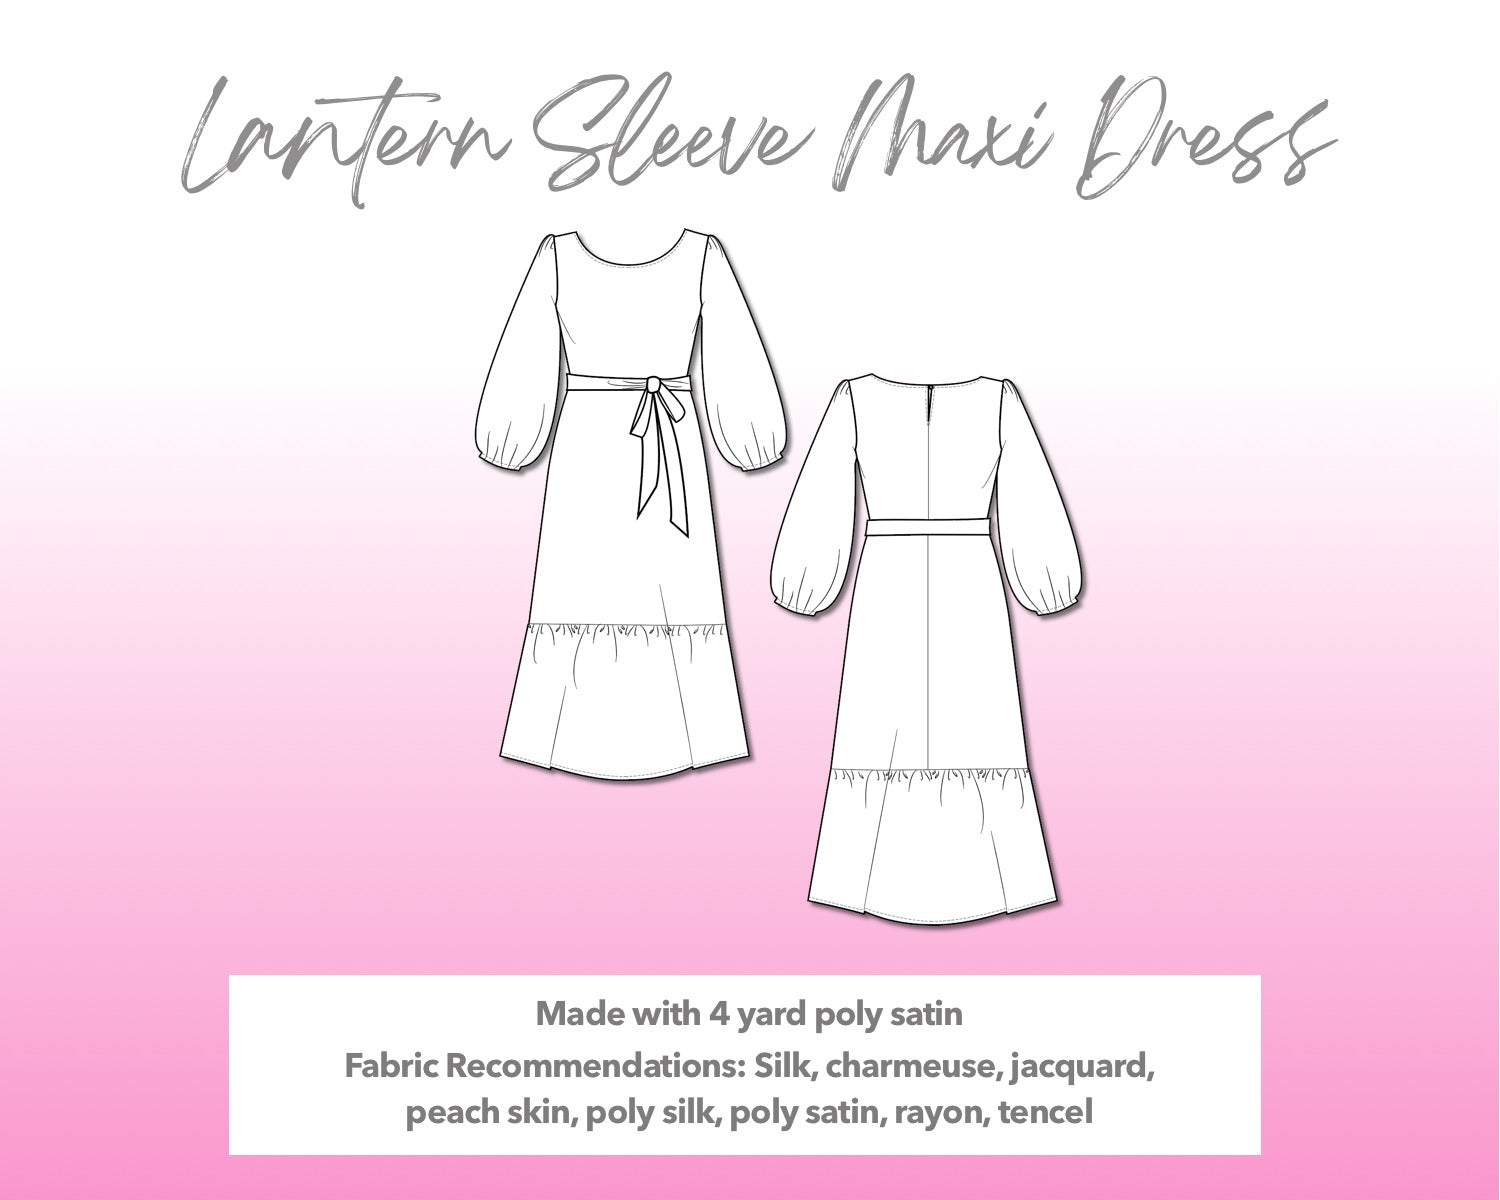 Illustration and detailed description for Lantern Sleeve Maxi Dress sewing pattern.